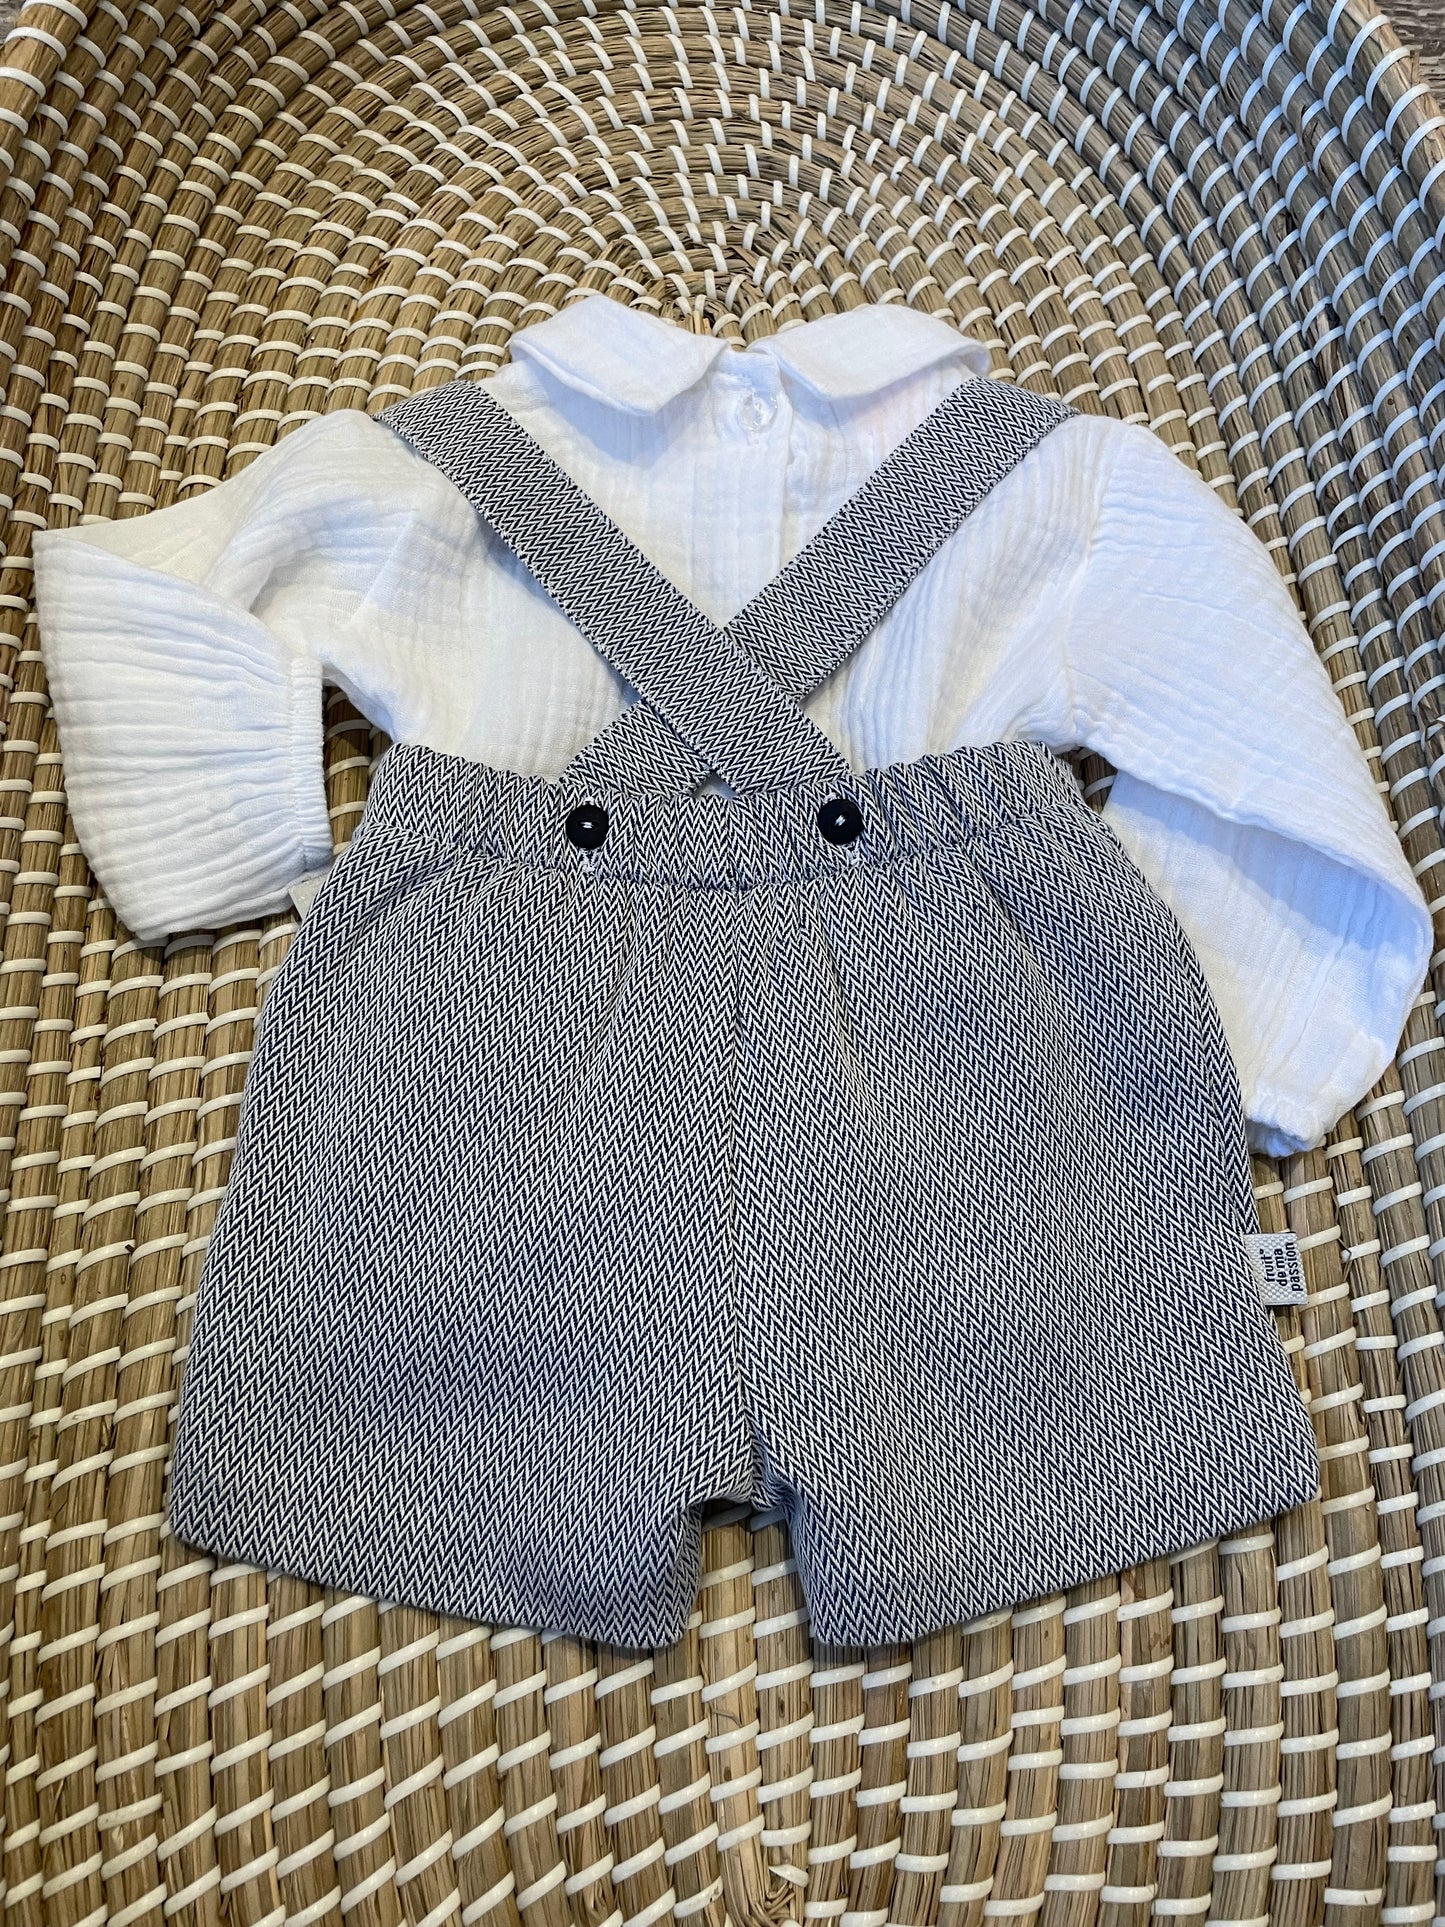 The blue and white suspenders set